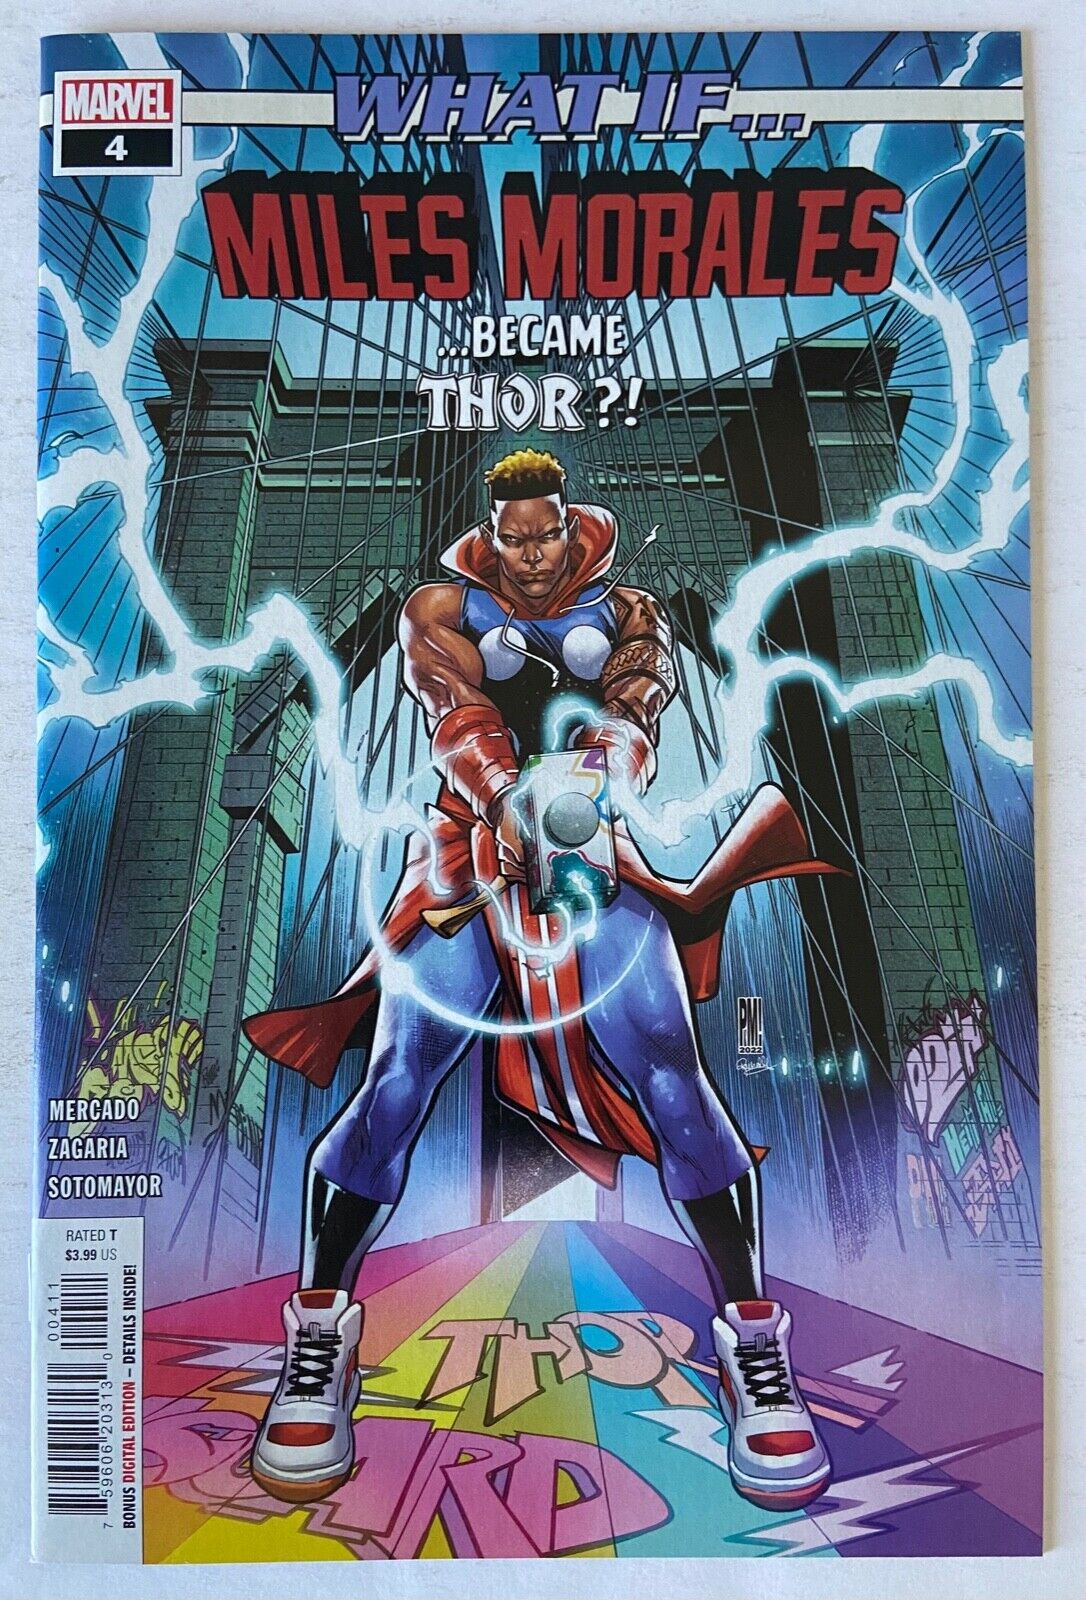 WHAT IF? MILES MORALES #4 Marvel 2022 NM 1st print BECAME THOR